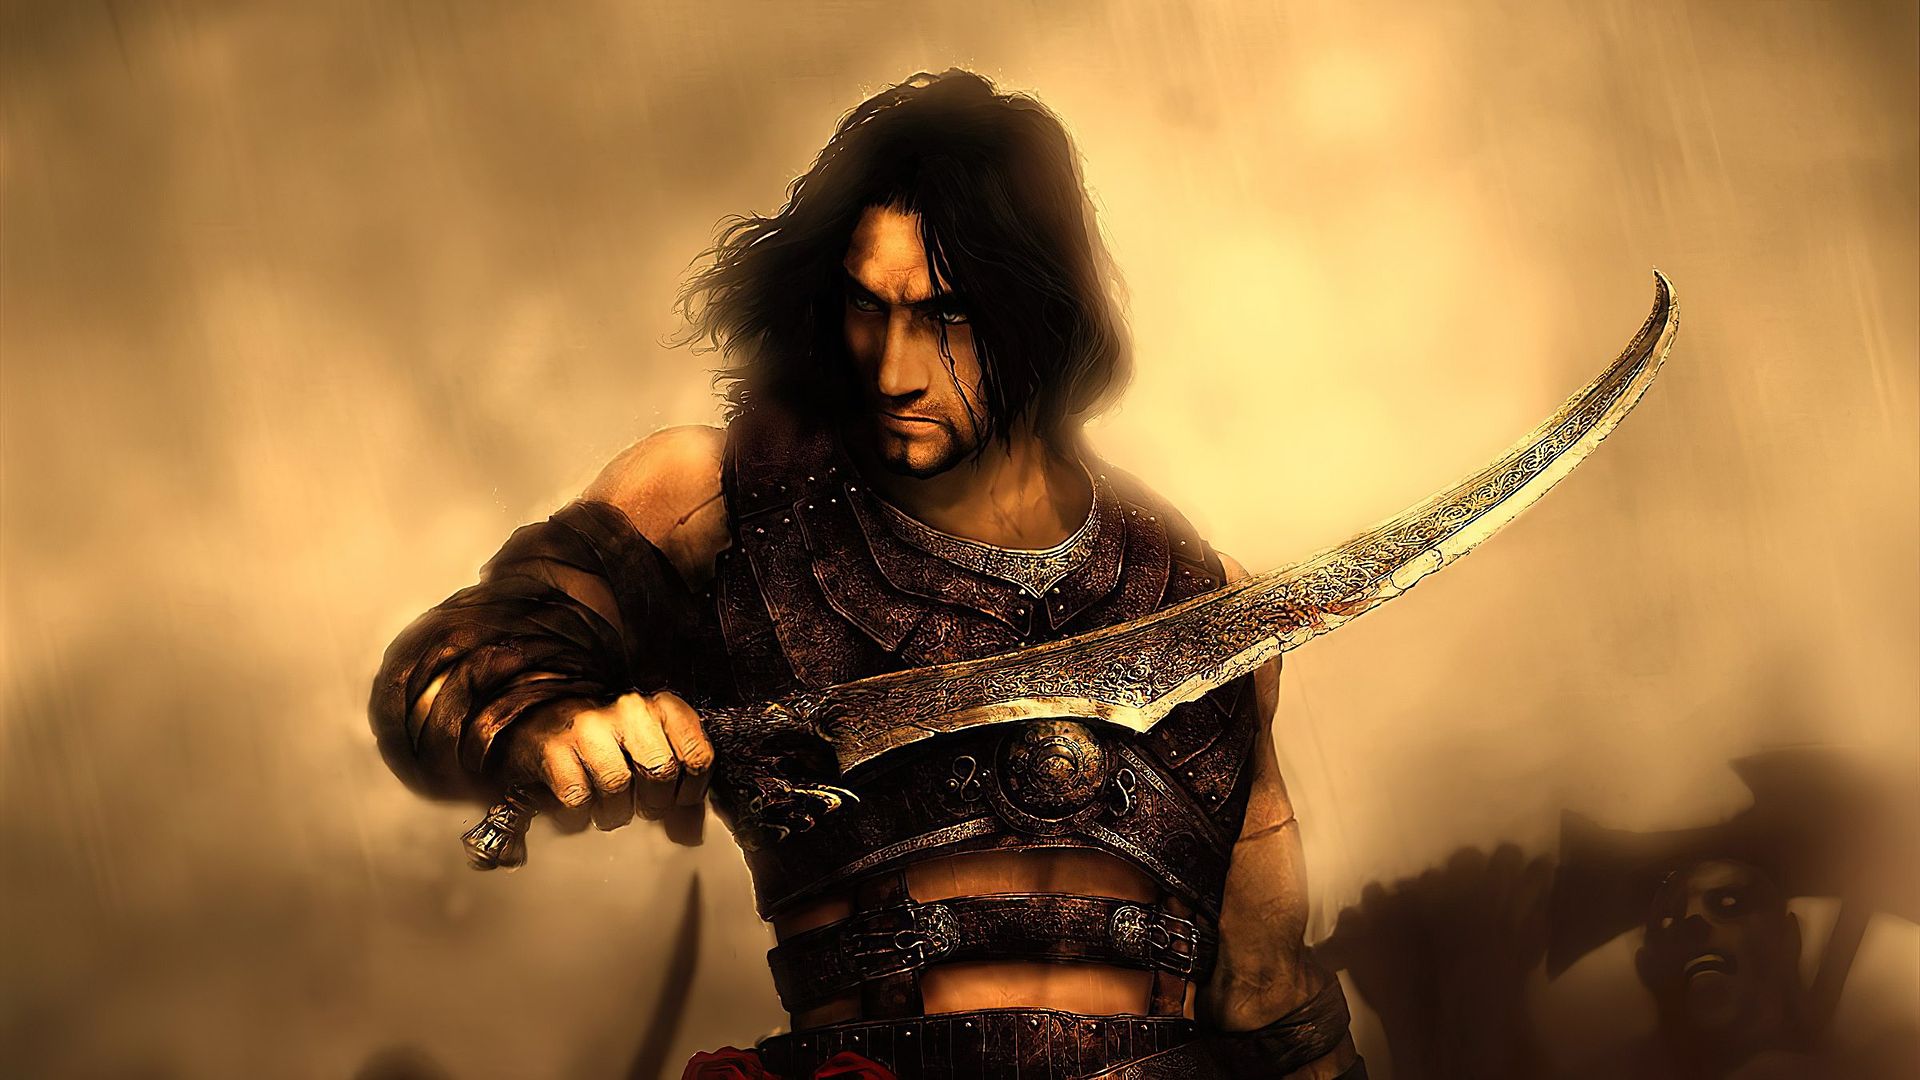 prince of persia: warrior within, prince of persia, video game